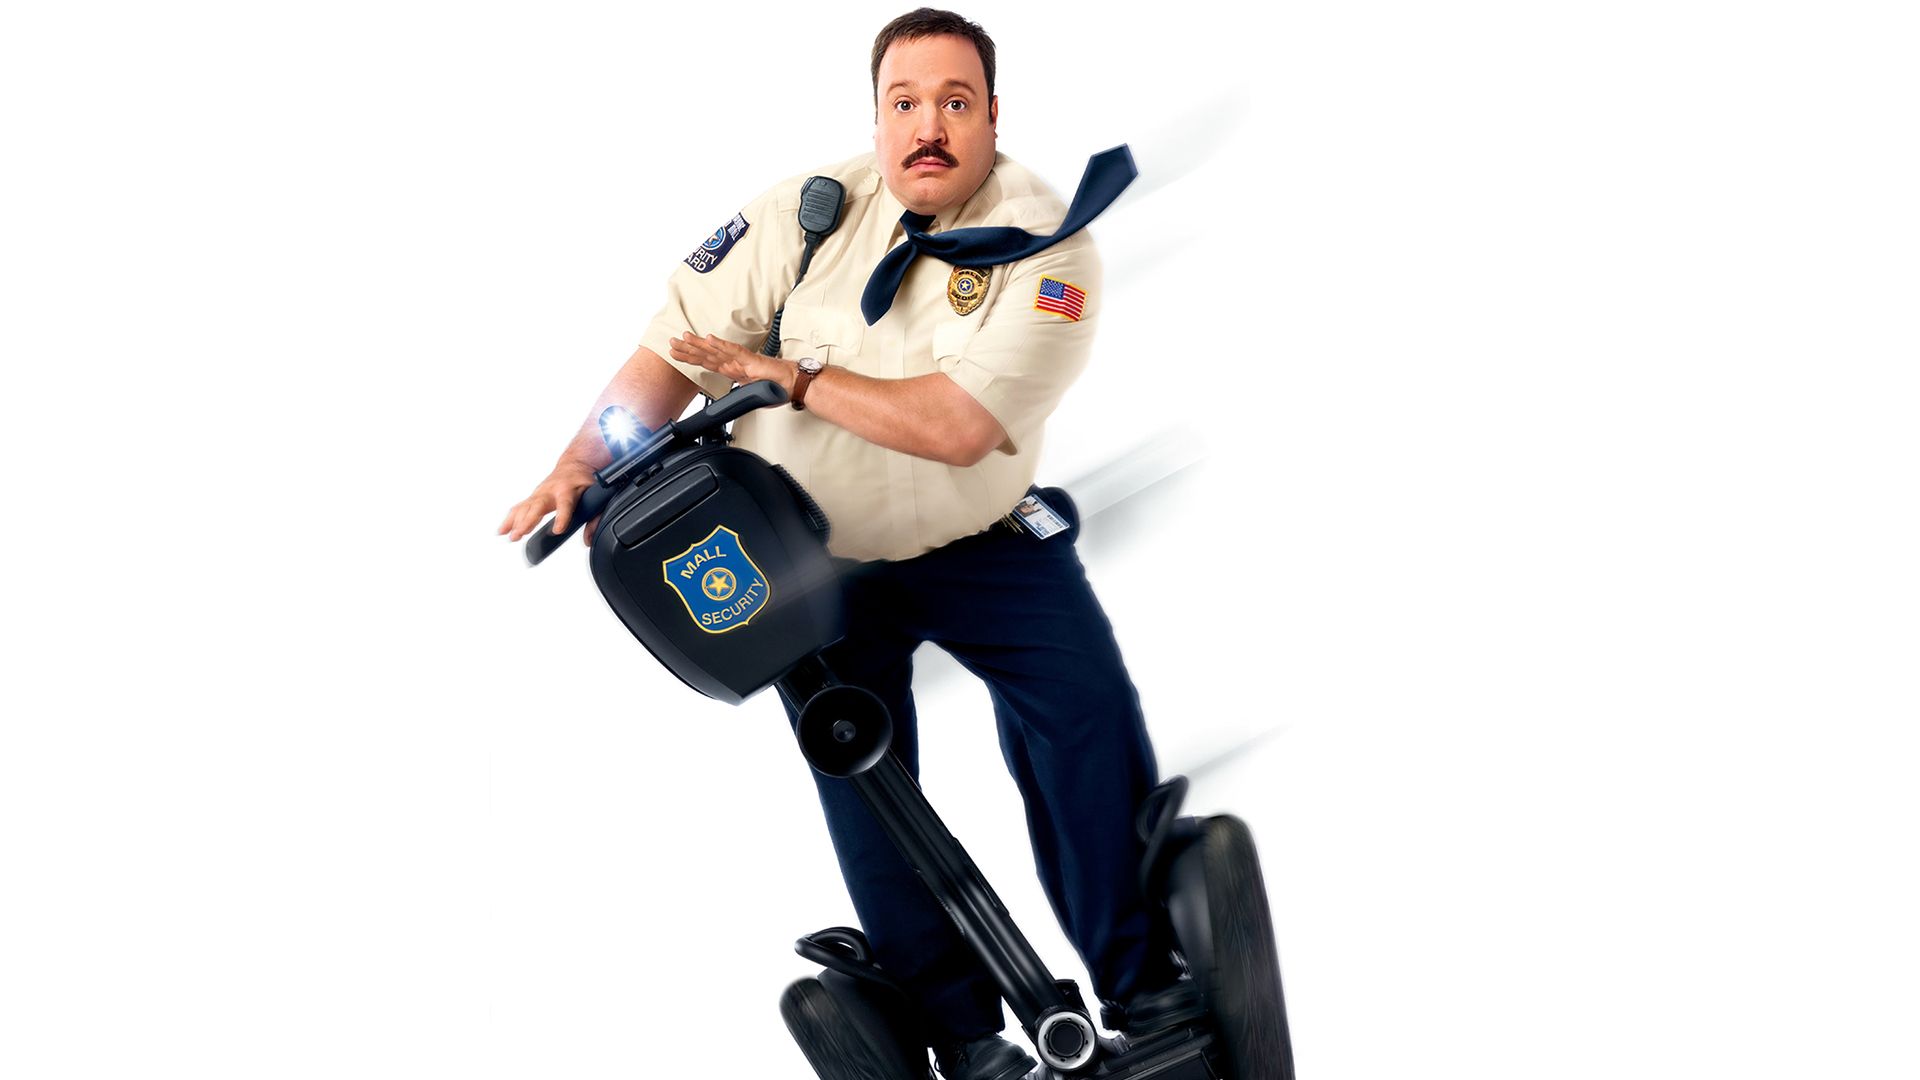 Mall Cop background